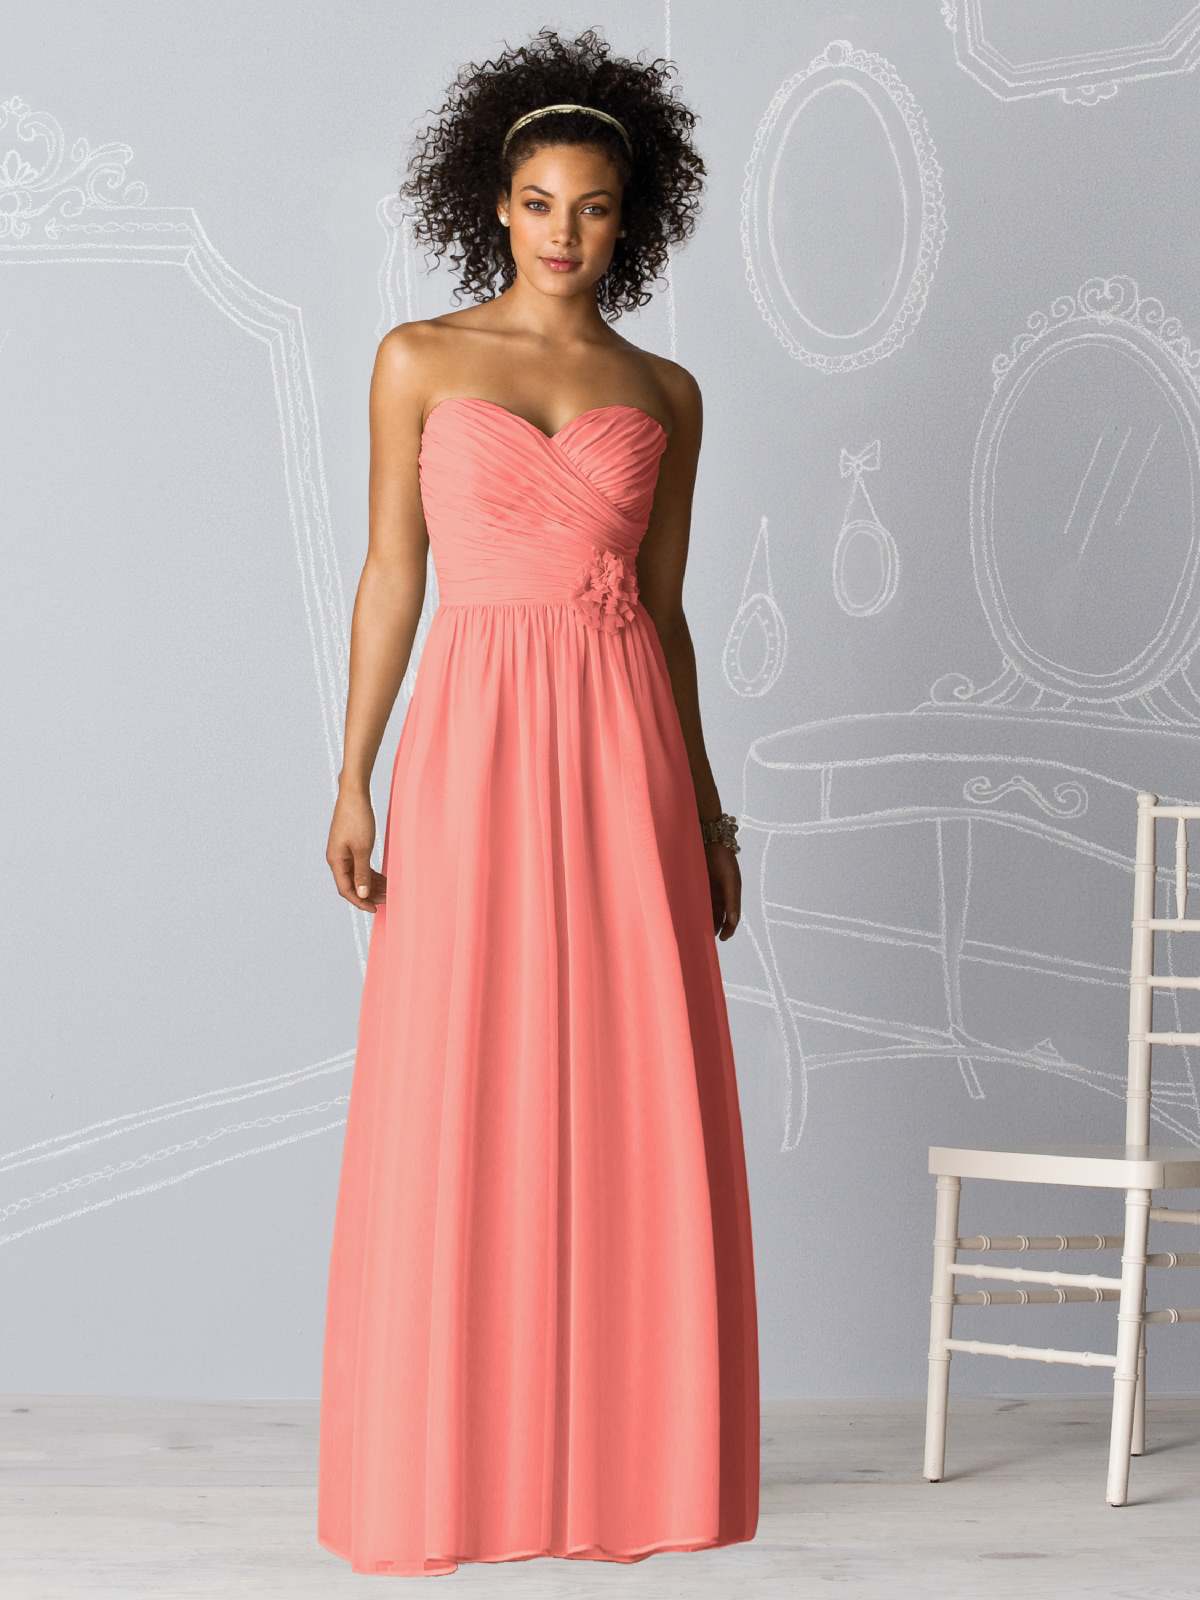 Apricot Column Strapless Sweetheart Zipper Floor Length Prom Dresses With Twist Drapes And Flowers 